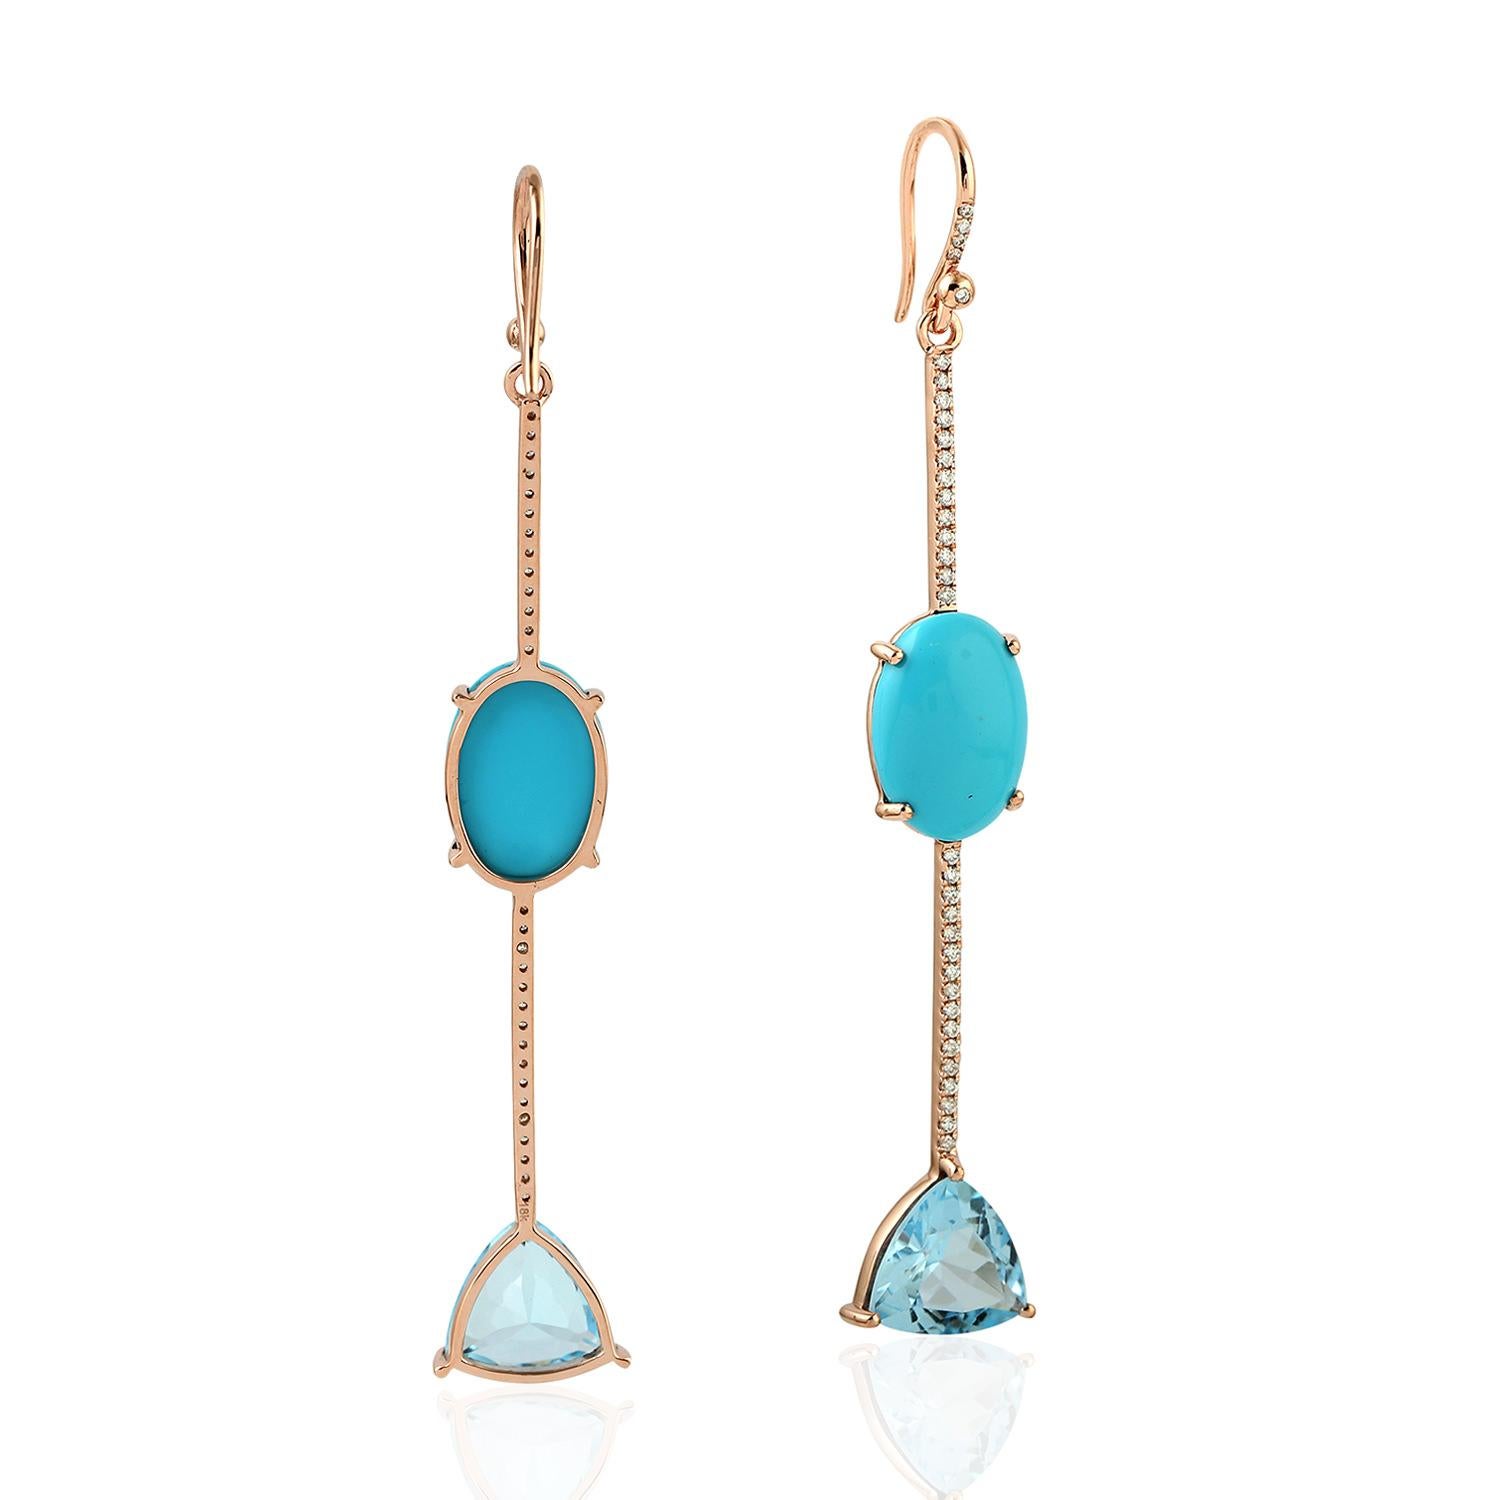 These beautiful linear drop earring are handmade in 18-karat gold. It is set with 7.82 carats turquoise, 7.05 carats topaz and .37 carats glimmering diamonds.

FOLLOW  MEGHNA JEWELS storefront to view the latest collection & exclusive pieces. 